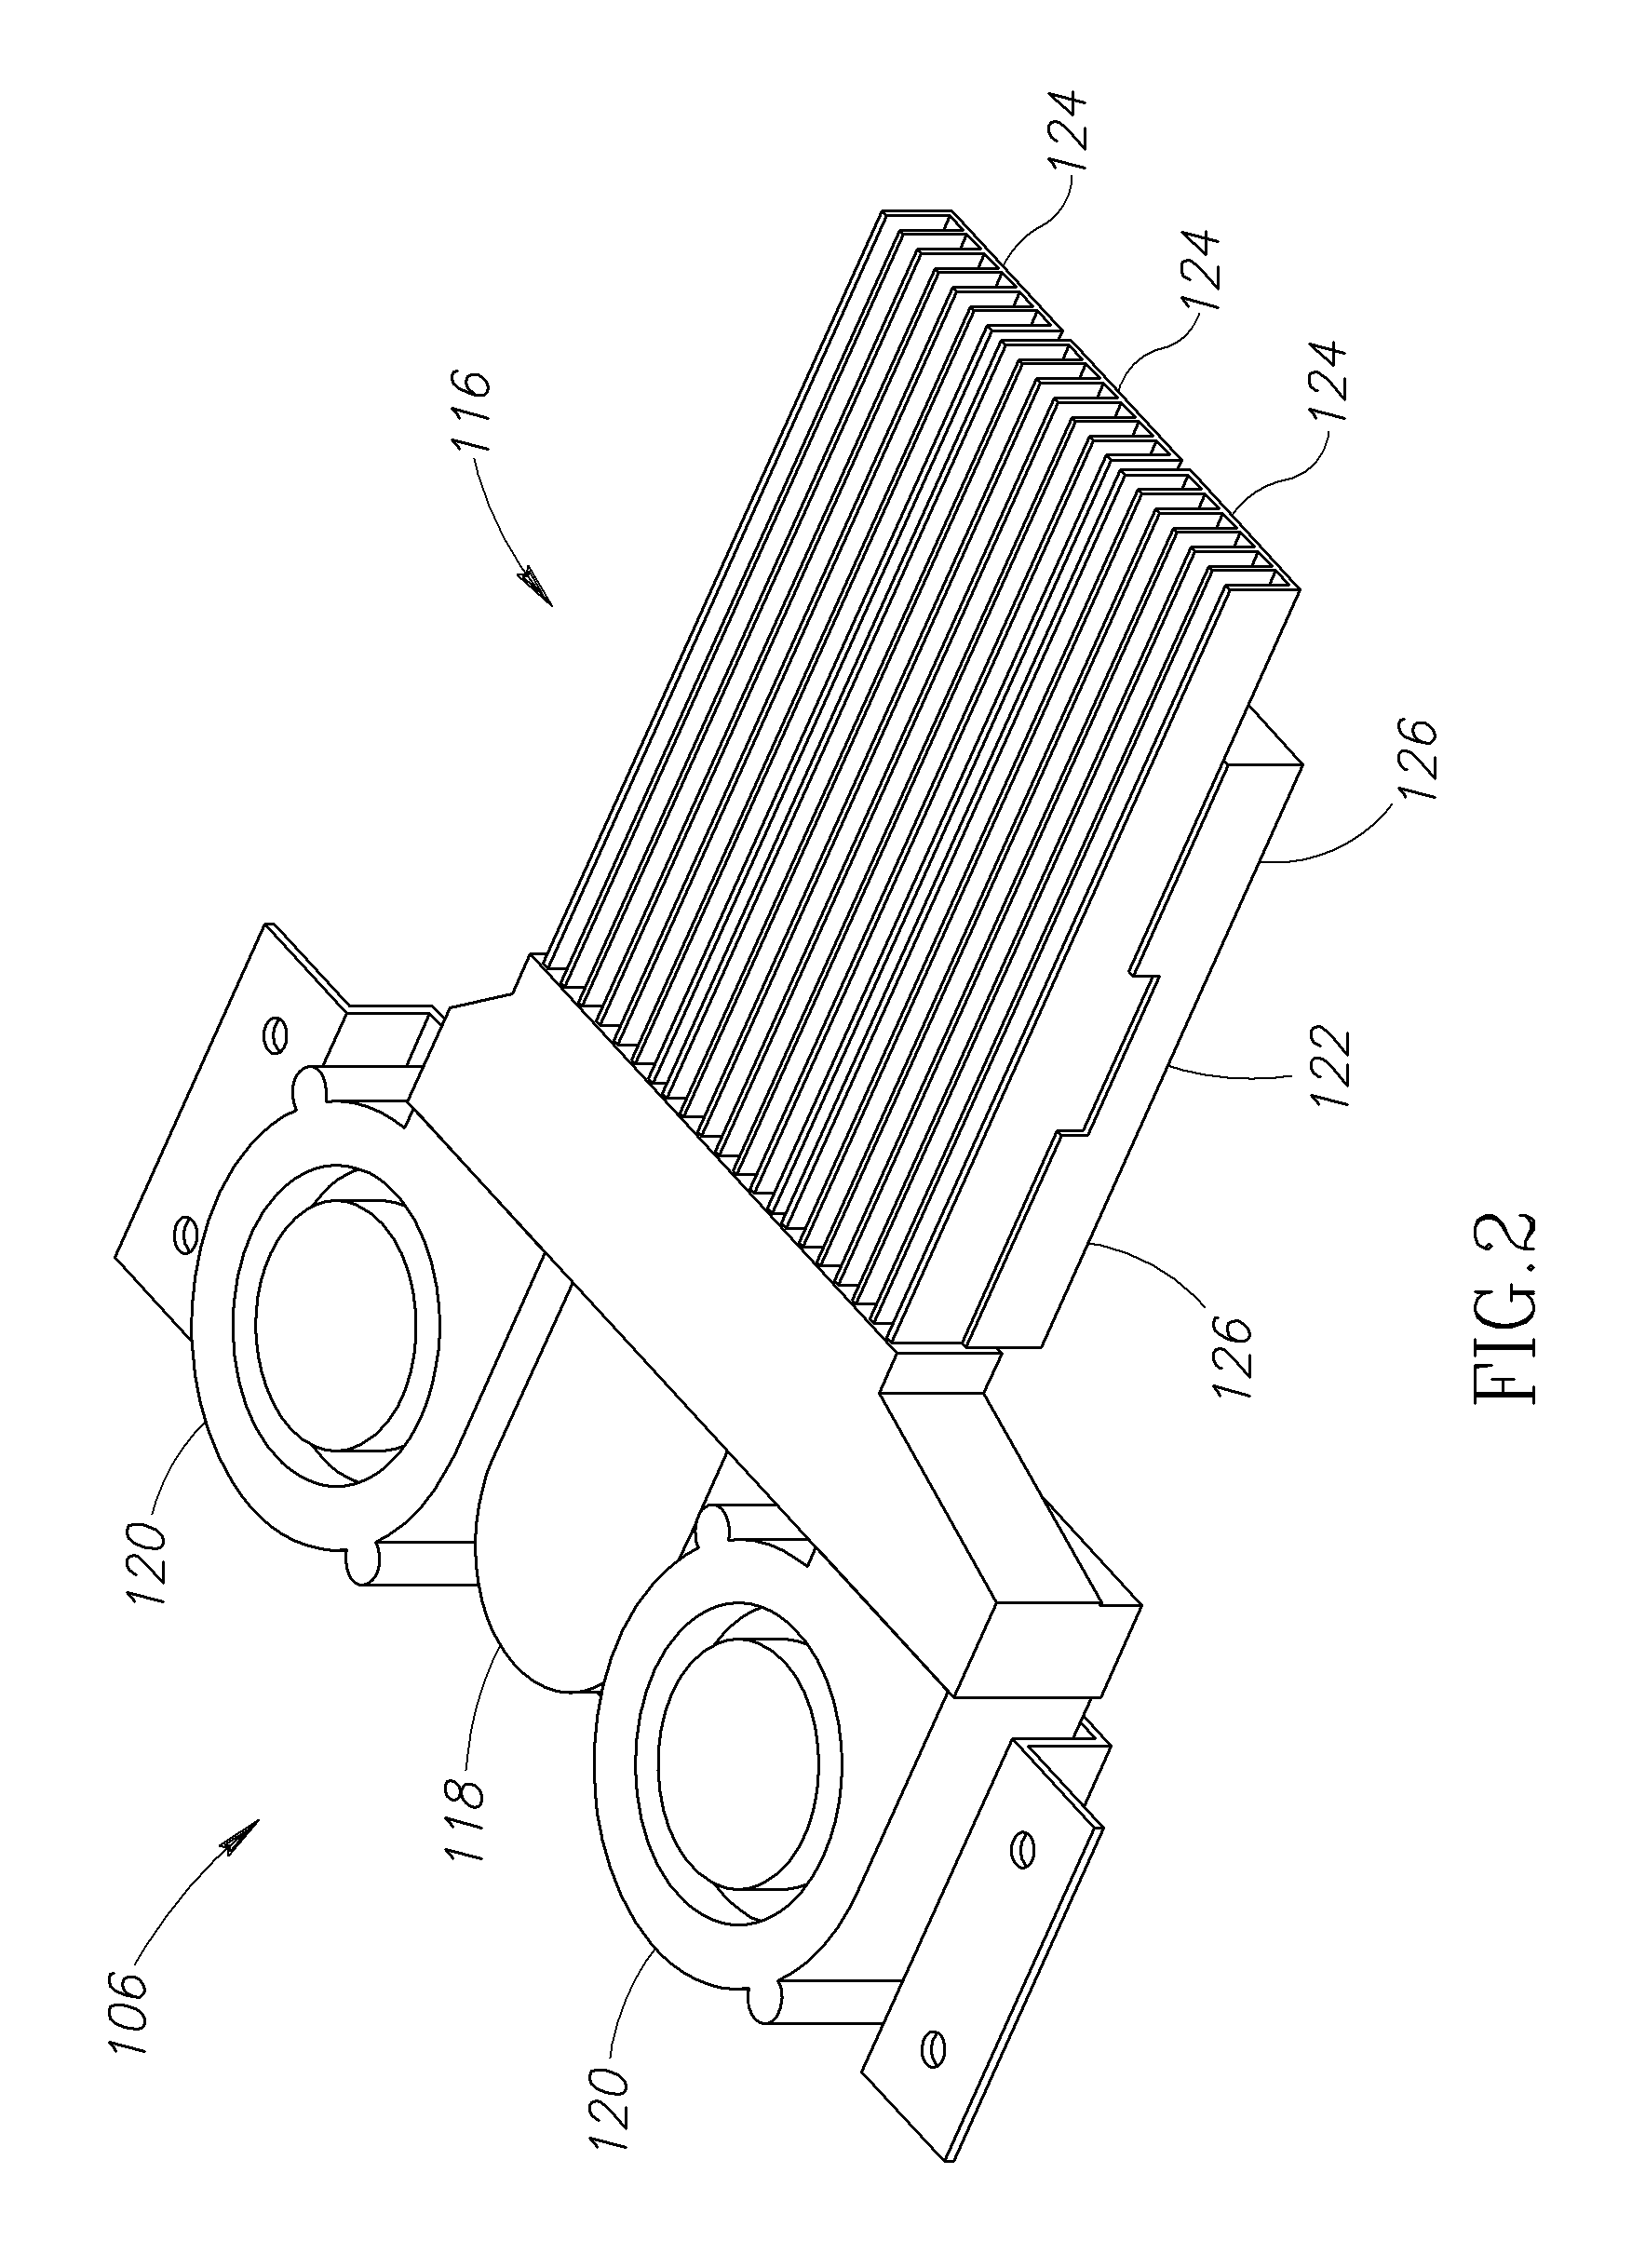 Cooling system for rack-mounted electronics equipment